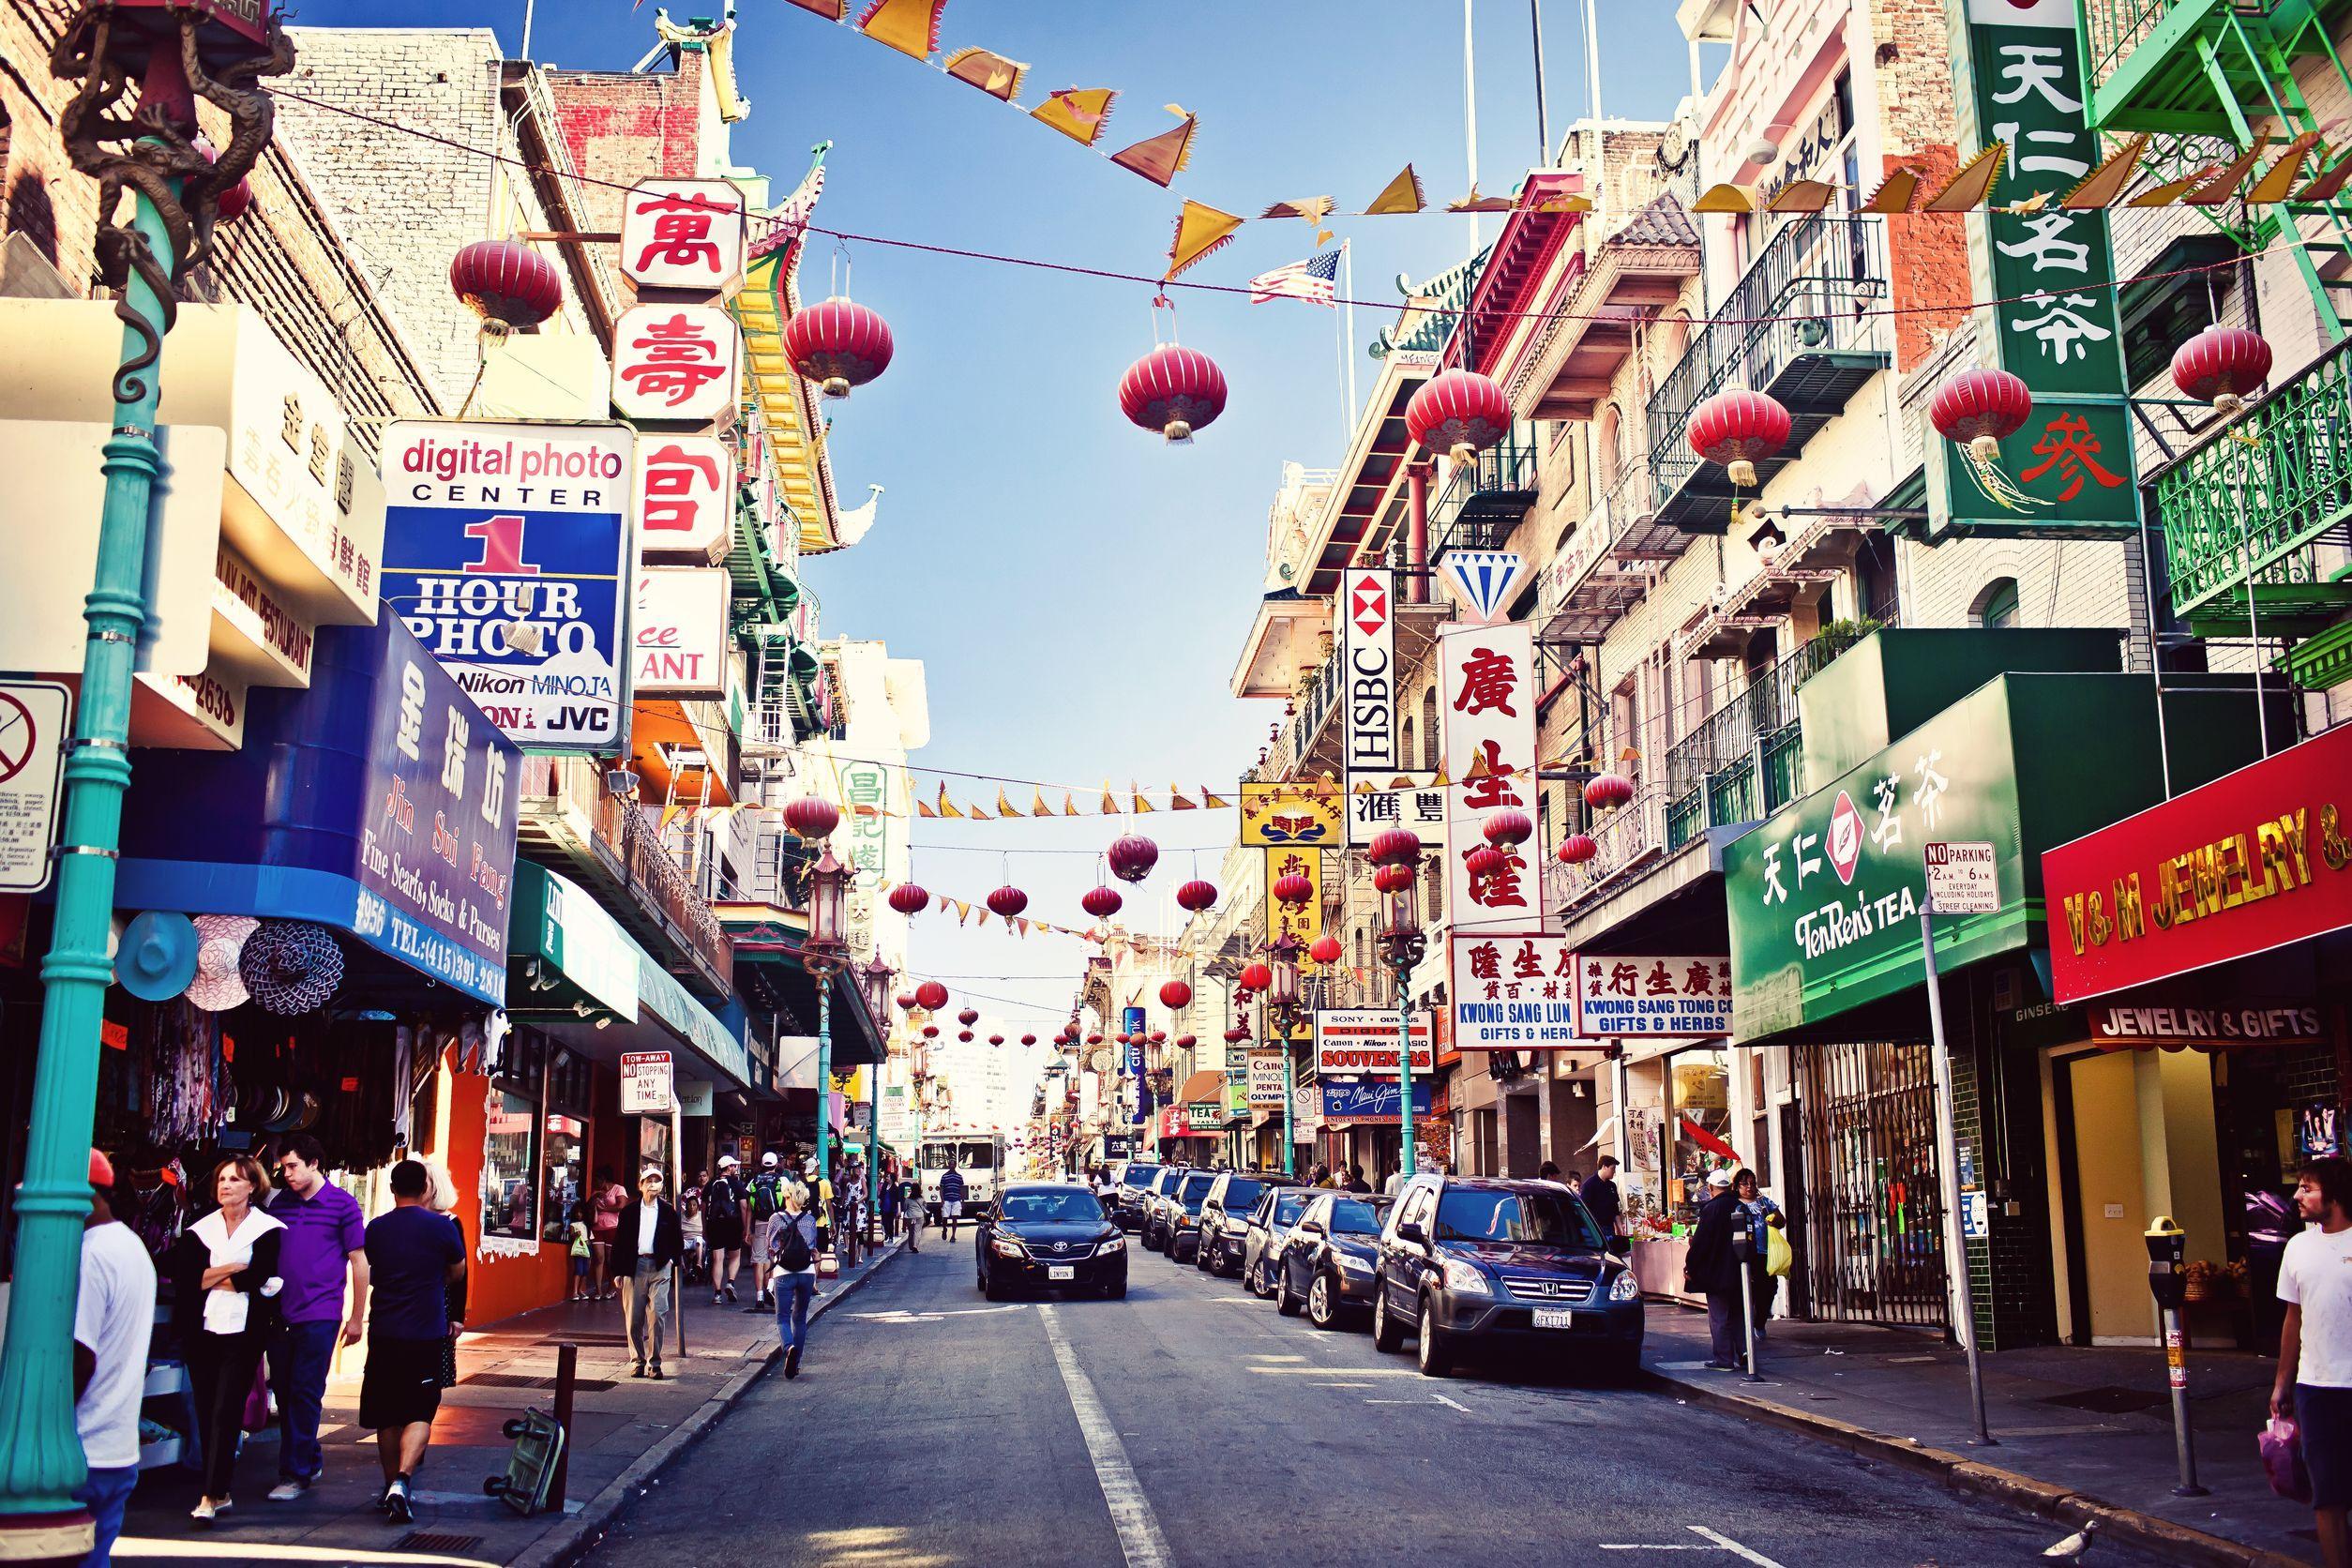 5184x3456px Widescreen wallpaper of Chinatown 12